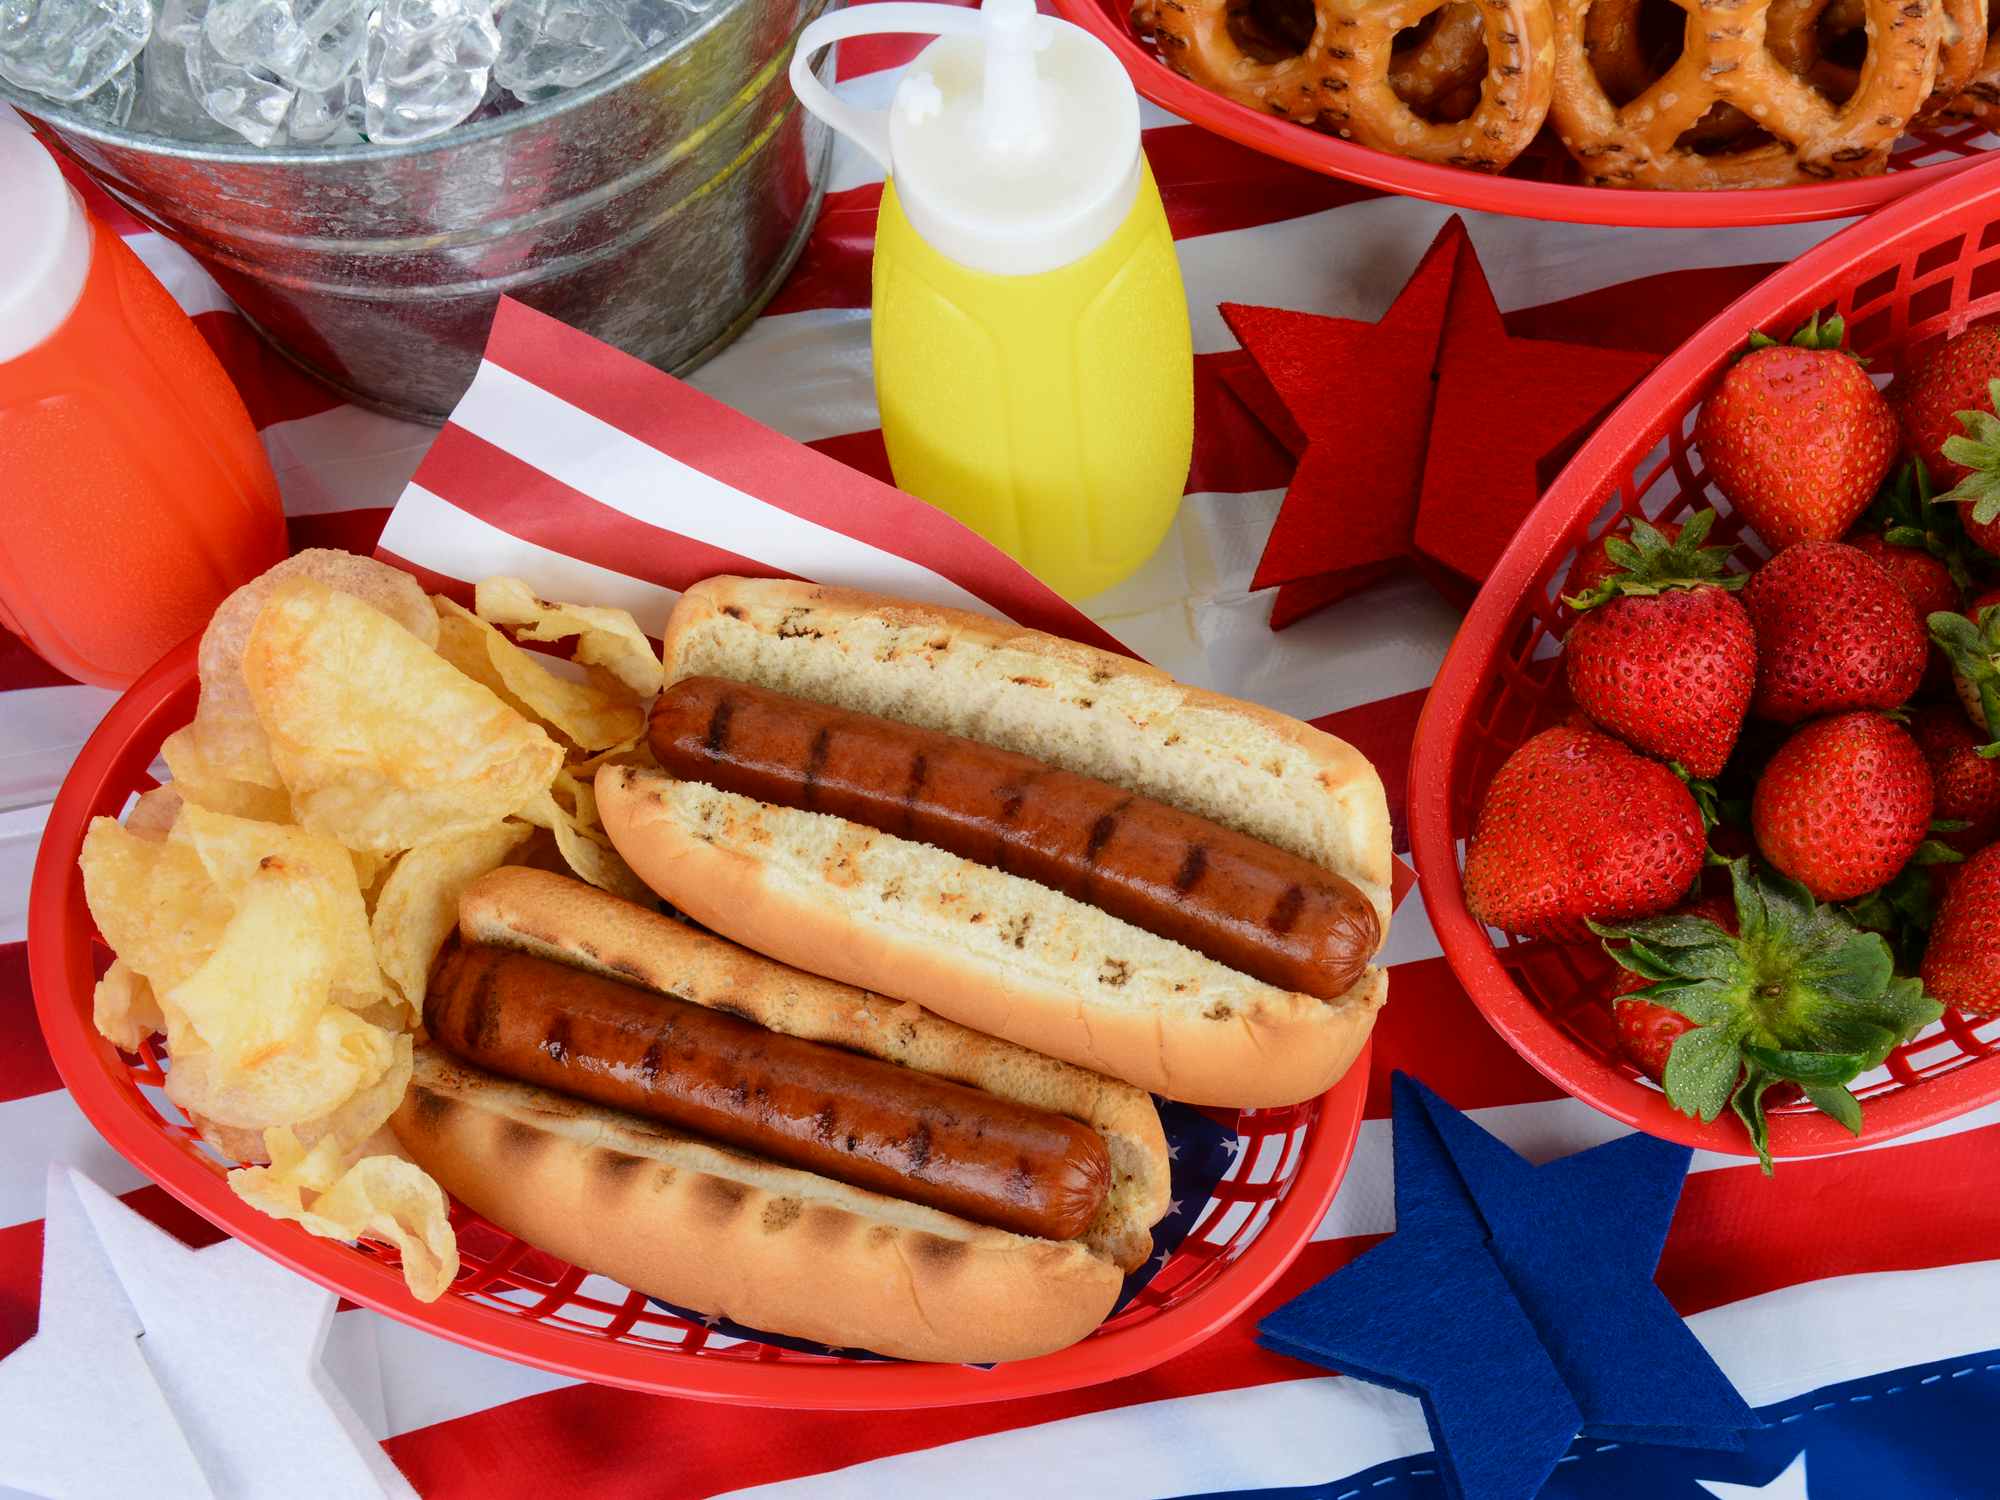 Hot Dogs, chips, strawberries, mustard, ketchup, pretzels, and ice bucket on a table decorated for the 4th of July